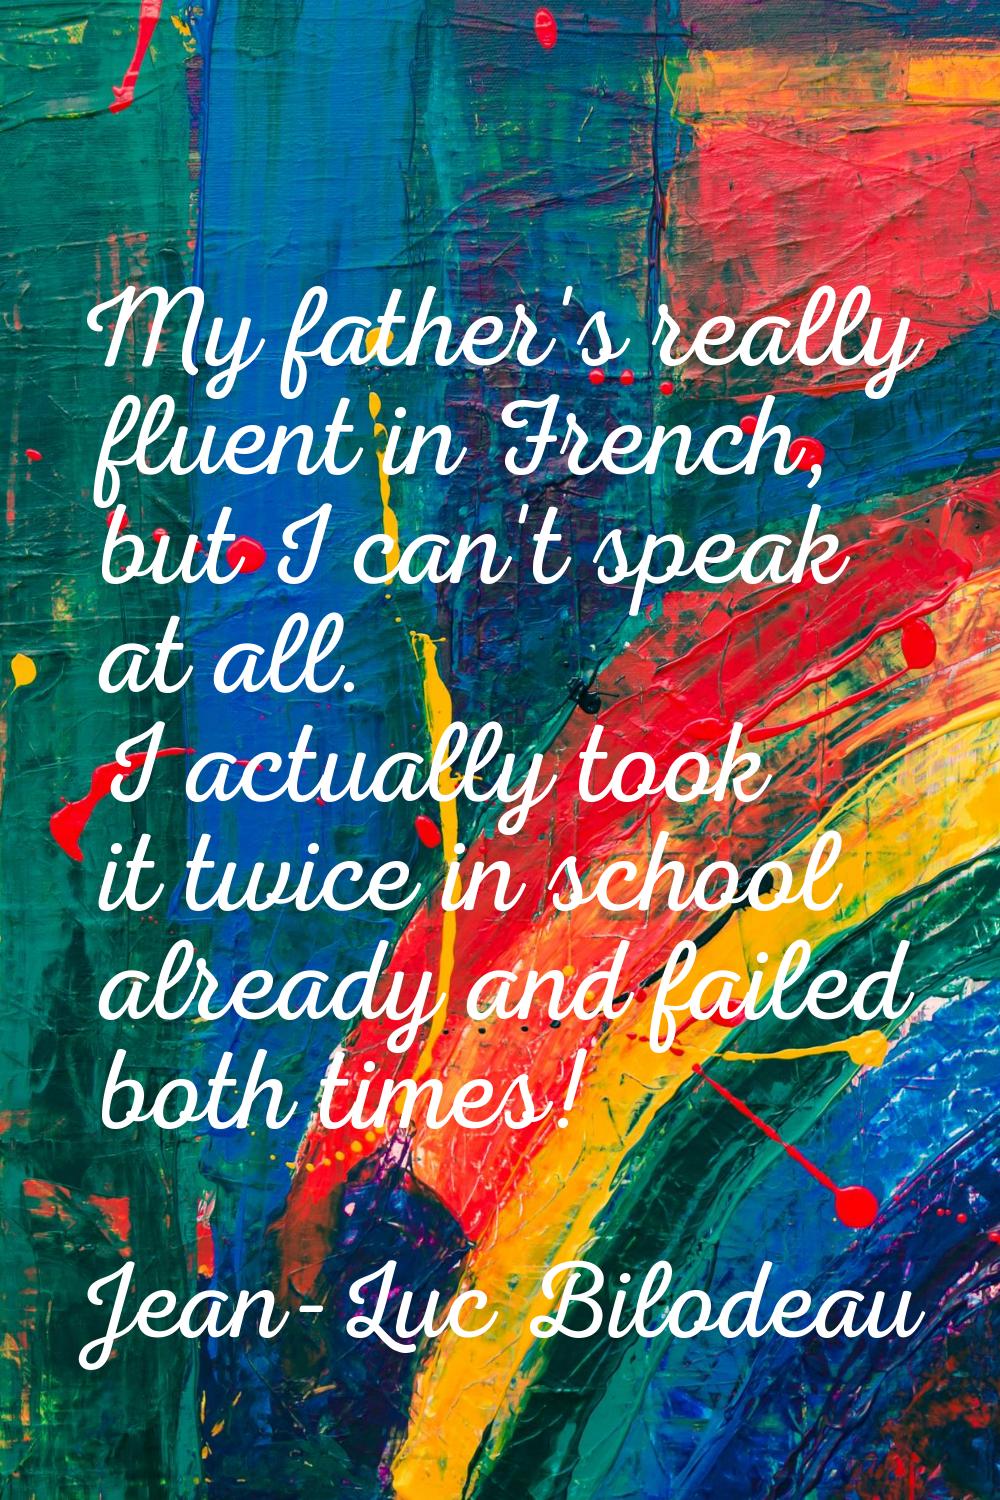 My father's really fluent in French, but I can't speak at all. I actually took it twice in school a